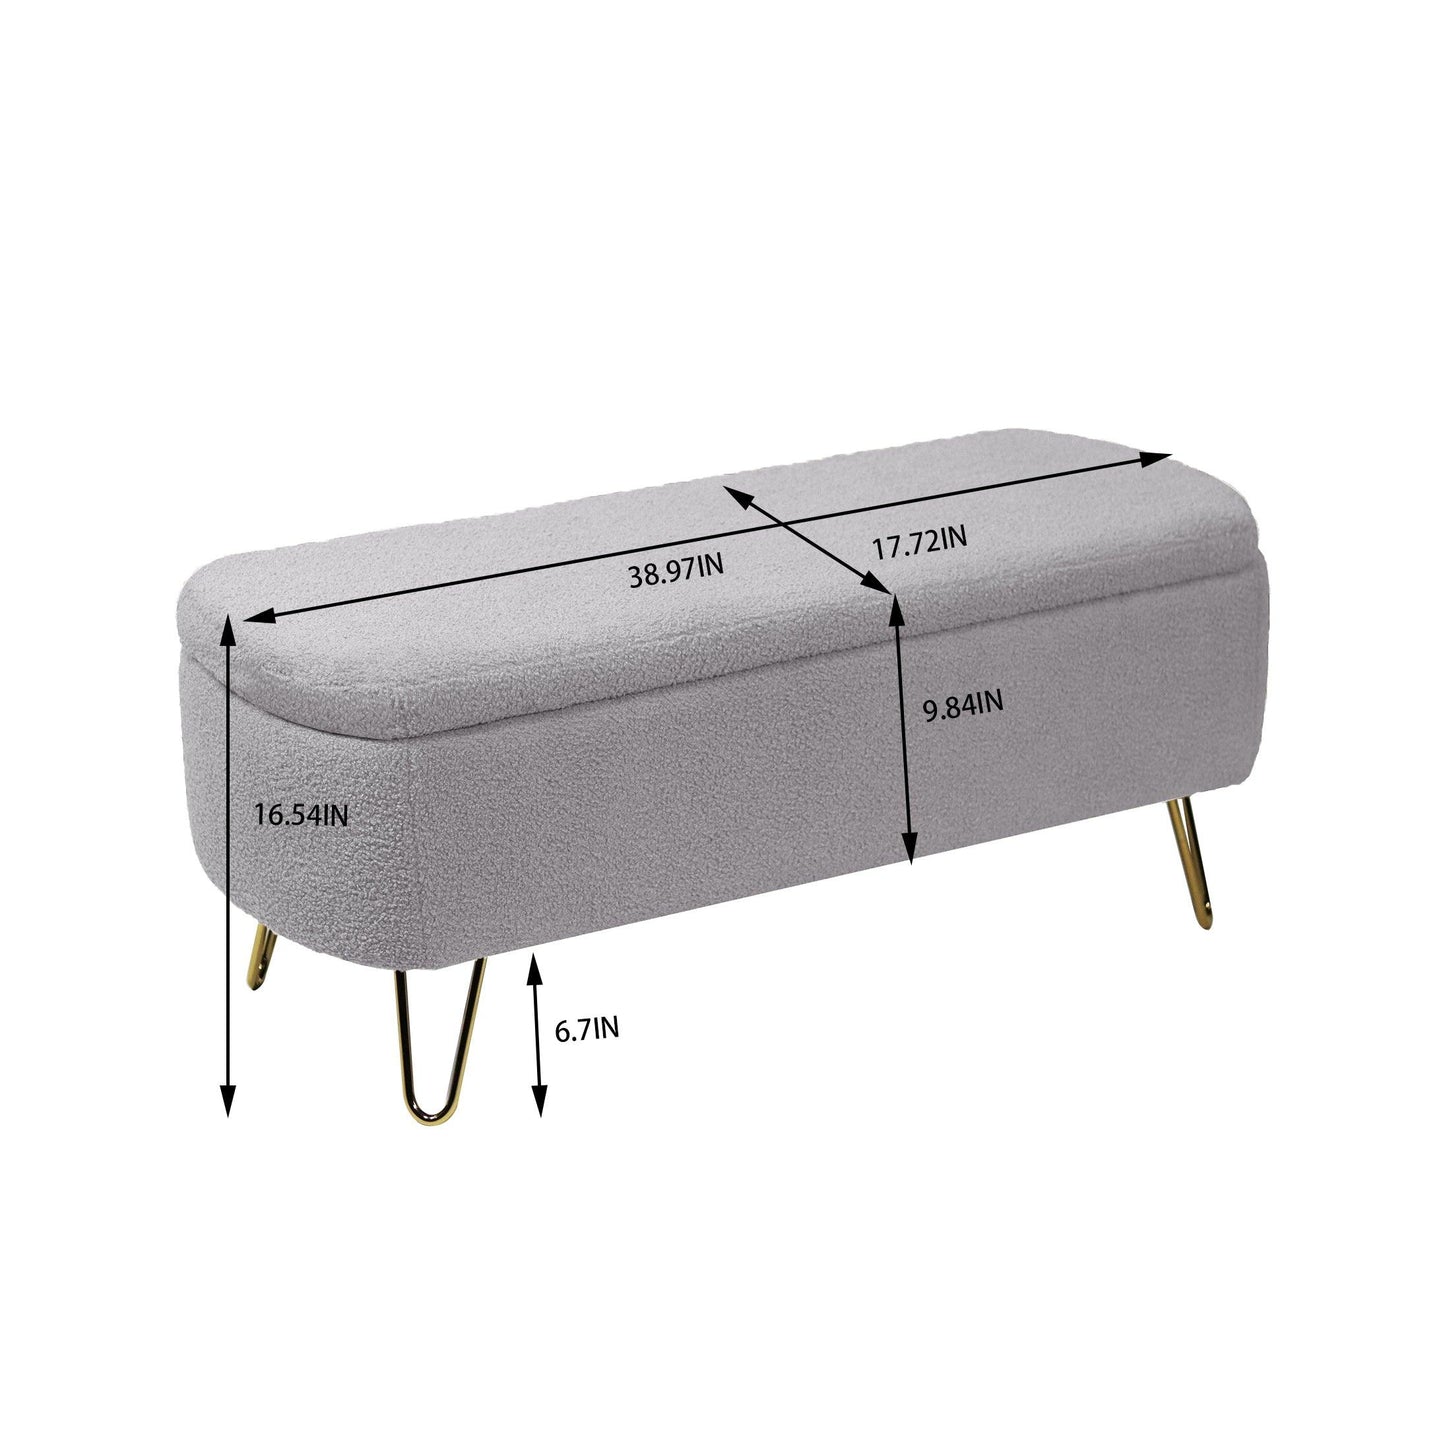 Grey Storage Ottoman Bench for End of Bed Gold Legs Modern Grey Faux Fur Entryway Bench - FurniFindUSA